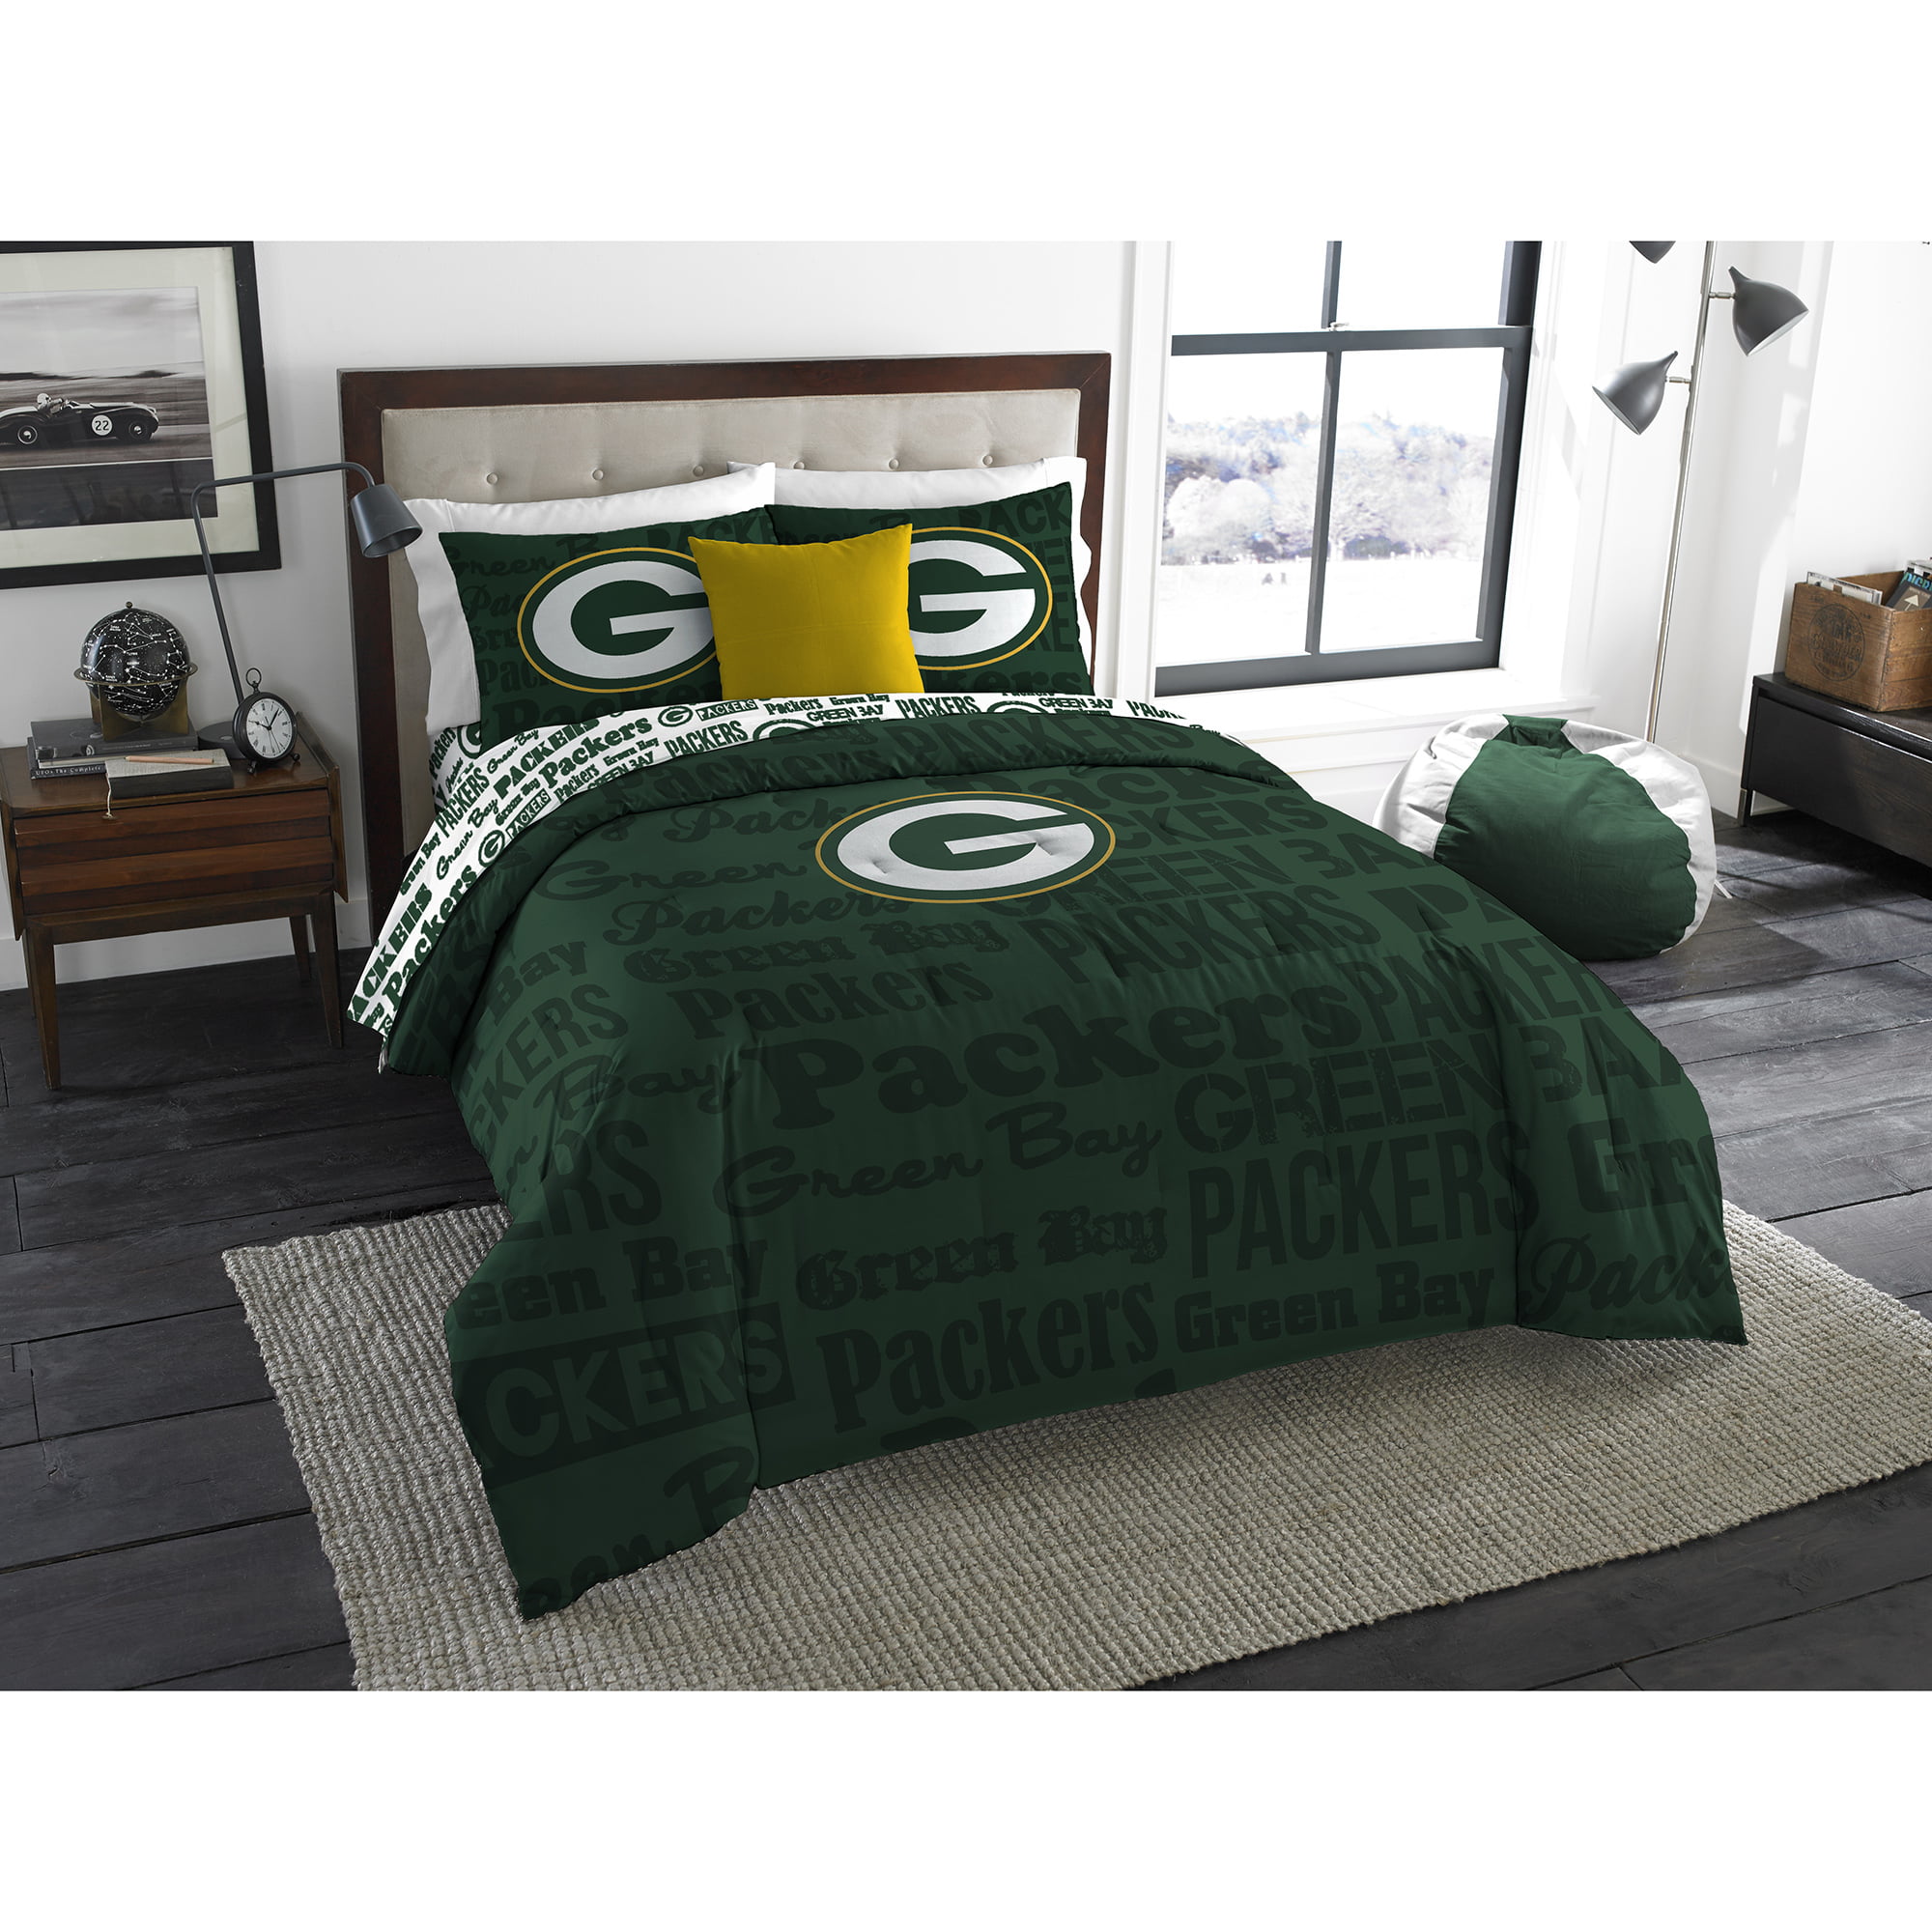 Nfl Green Bay Packers Bed In A Bag, Green Bay Packers Twin Size Bedding